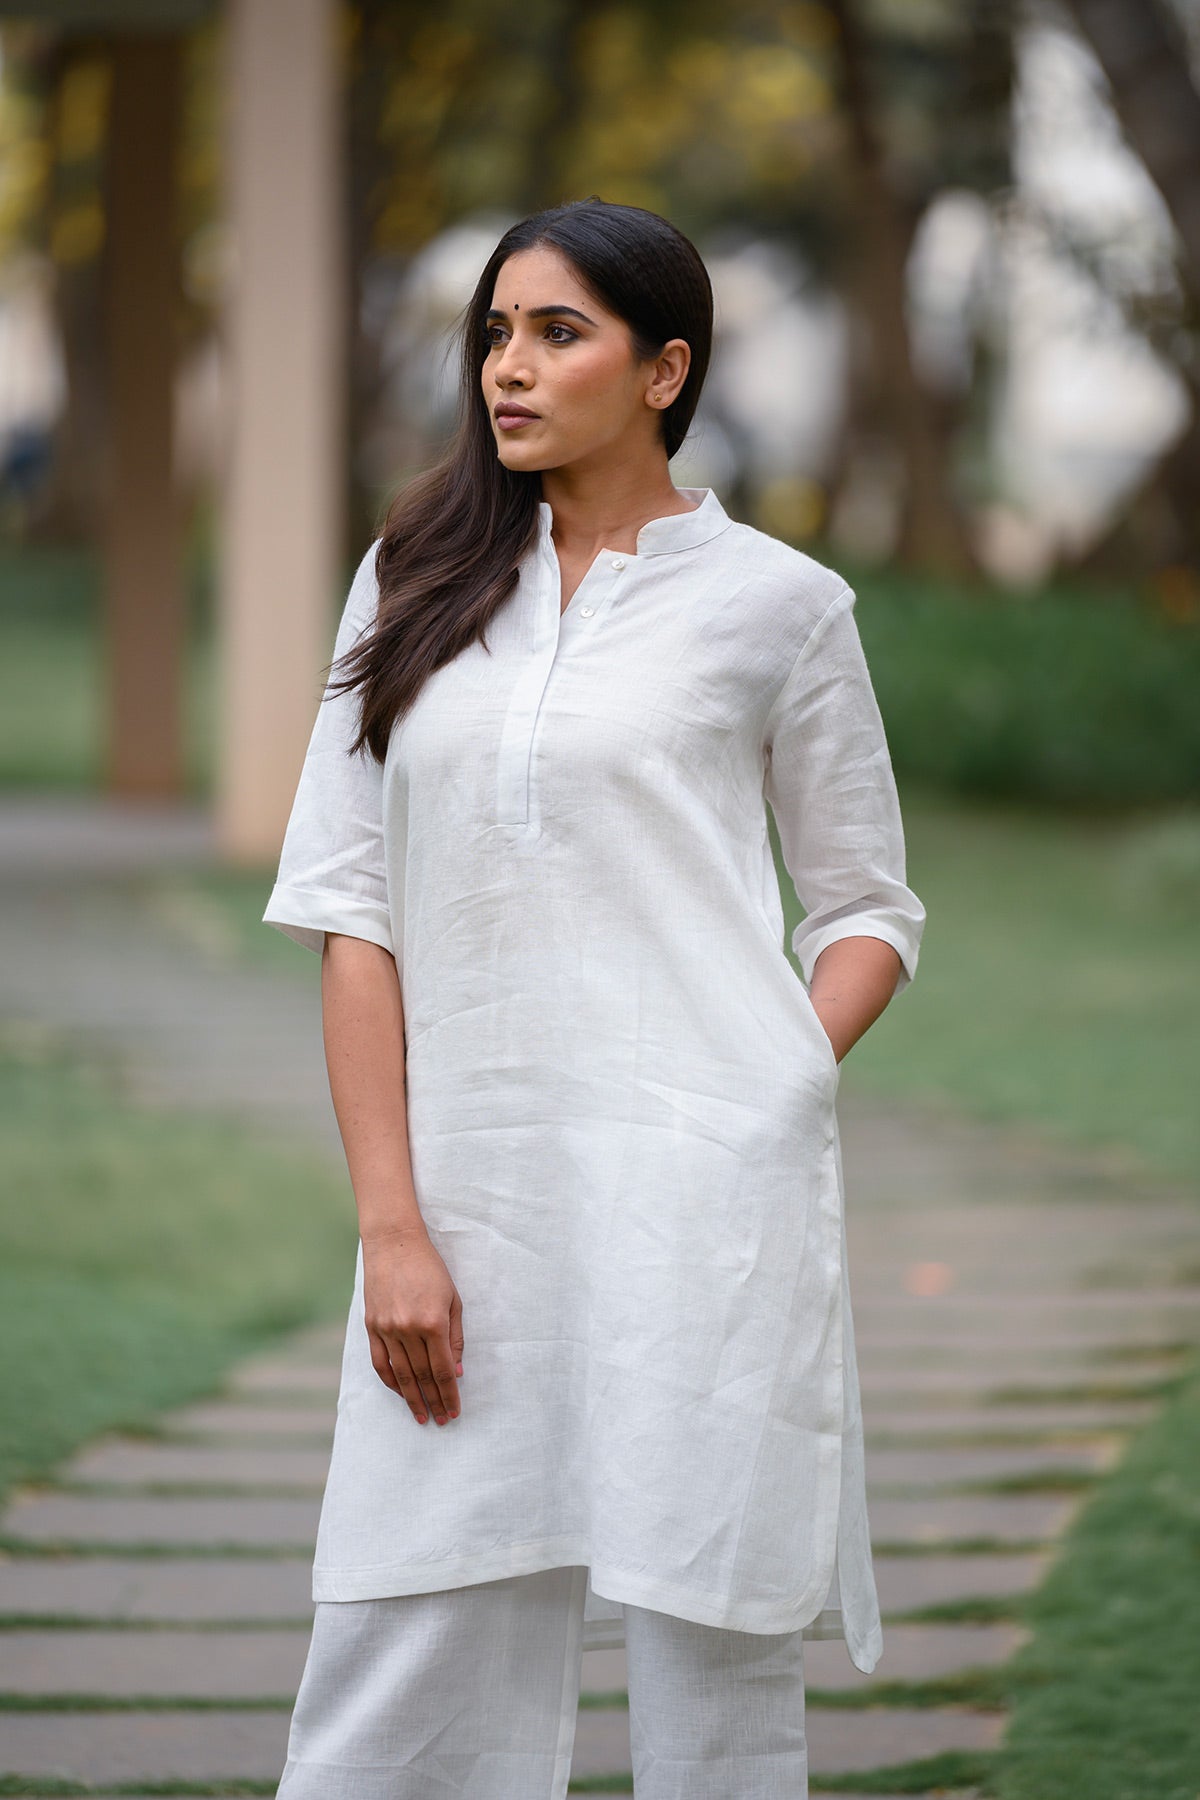 Designer White Pathani Lenin Kurta With Pants for a Royal Look By Tree   Yard of Deals